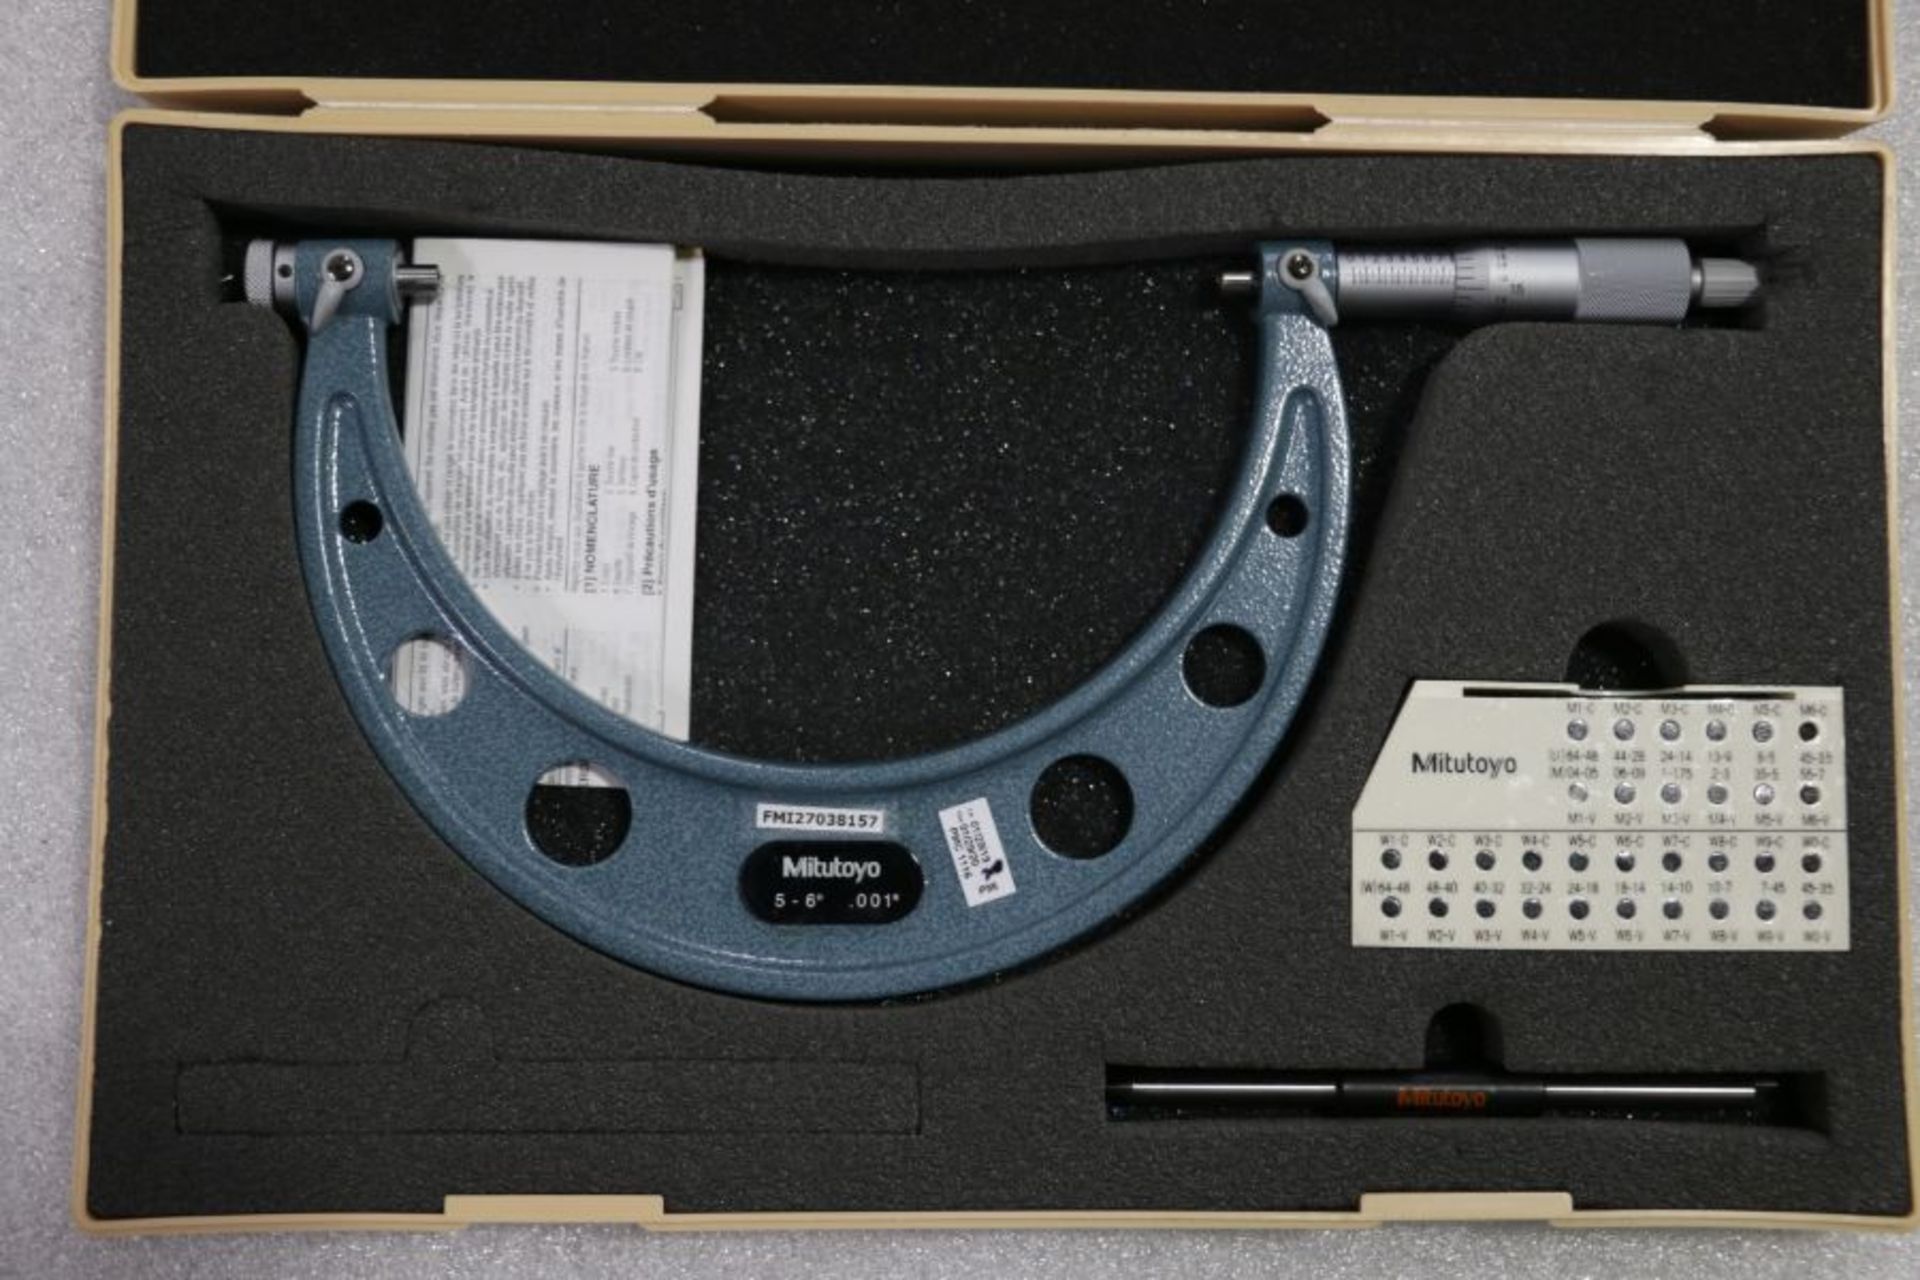 Mitutoyo 5" - 6" Pitch Micrometer